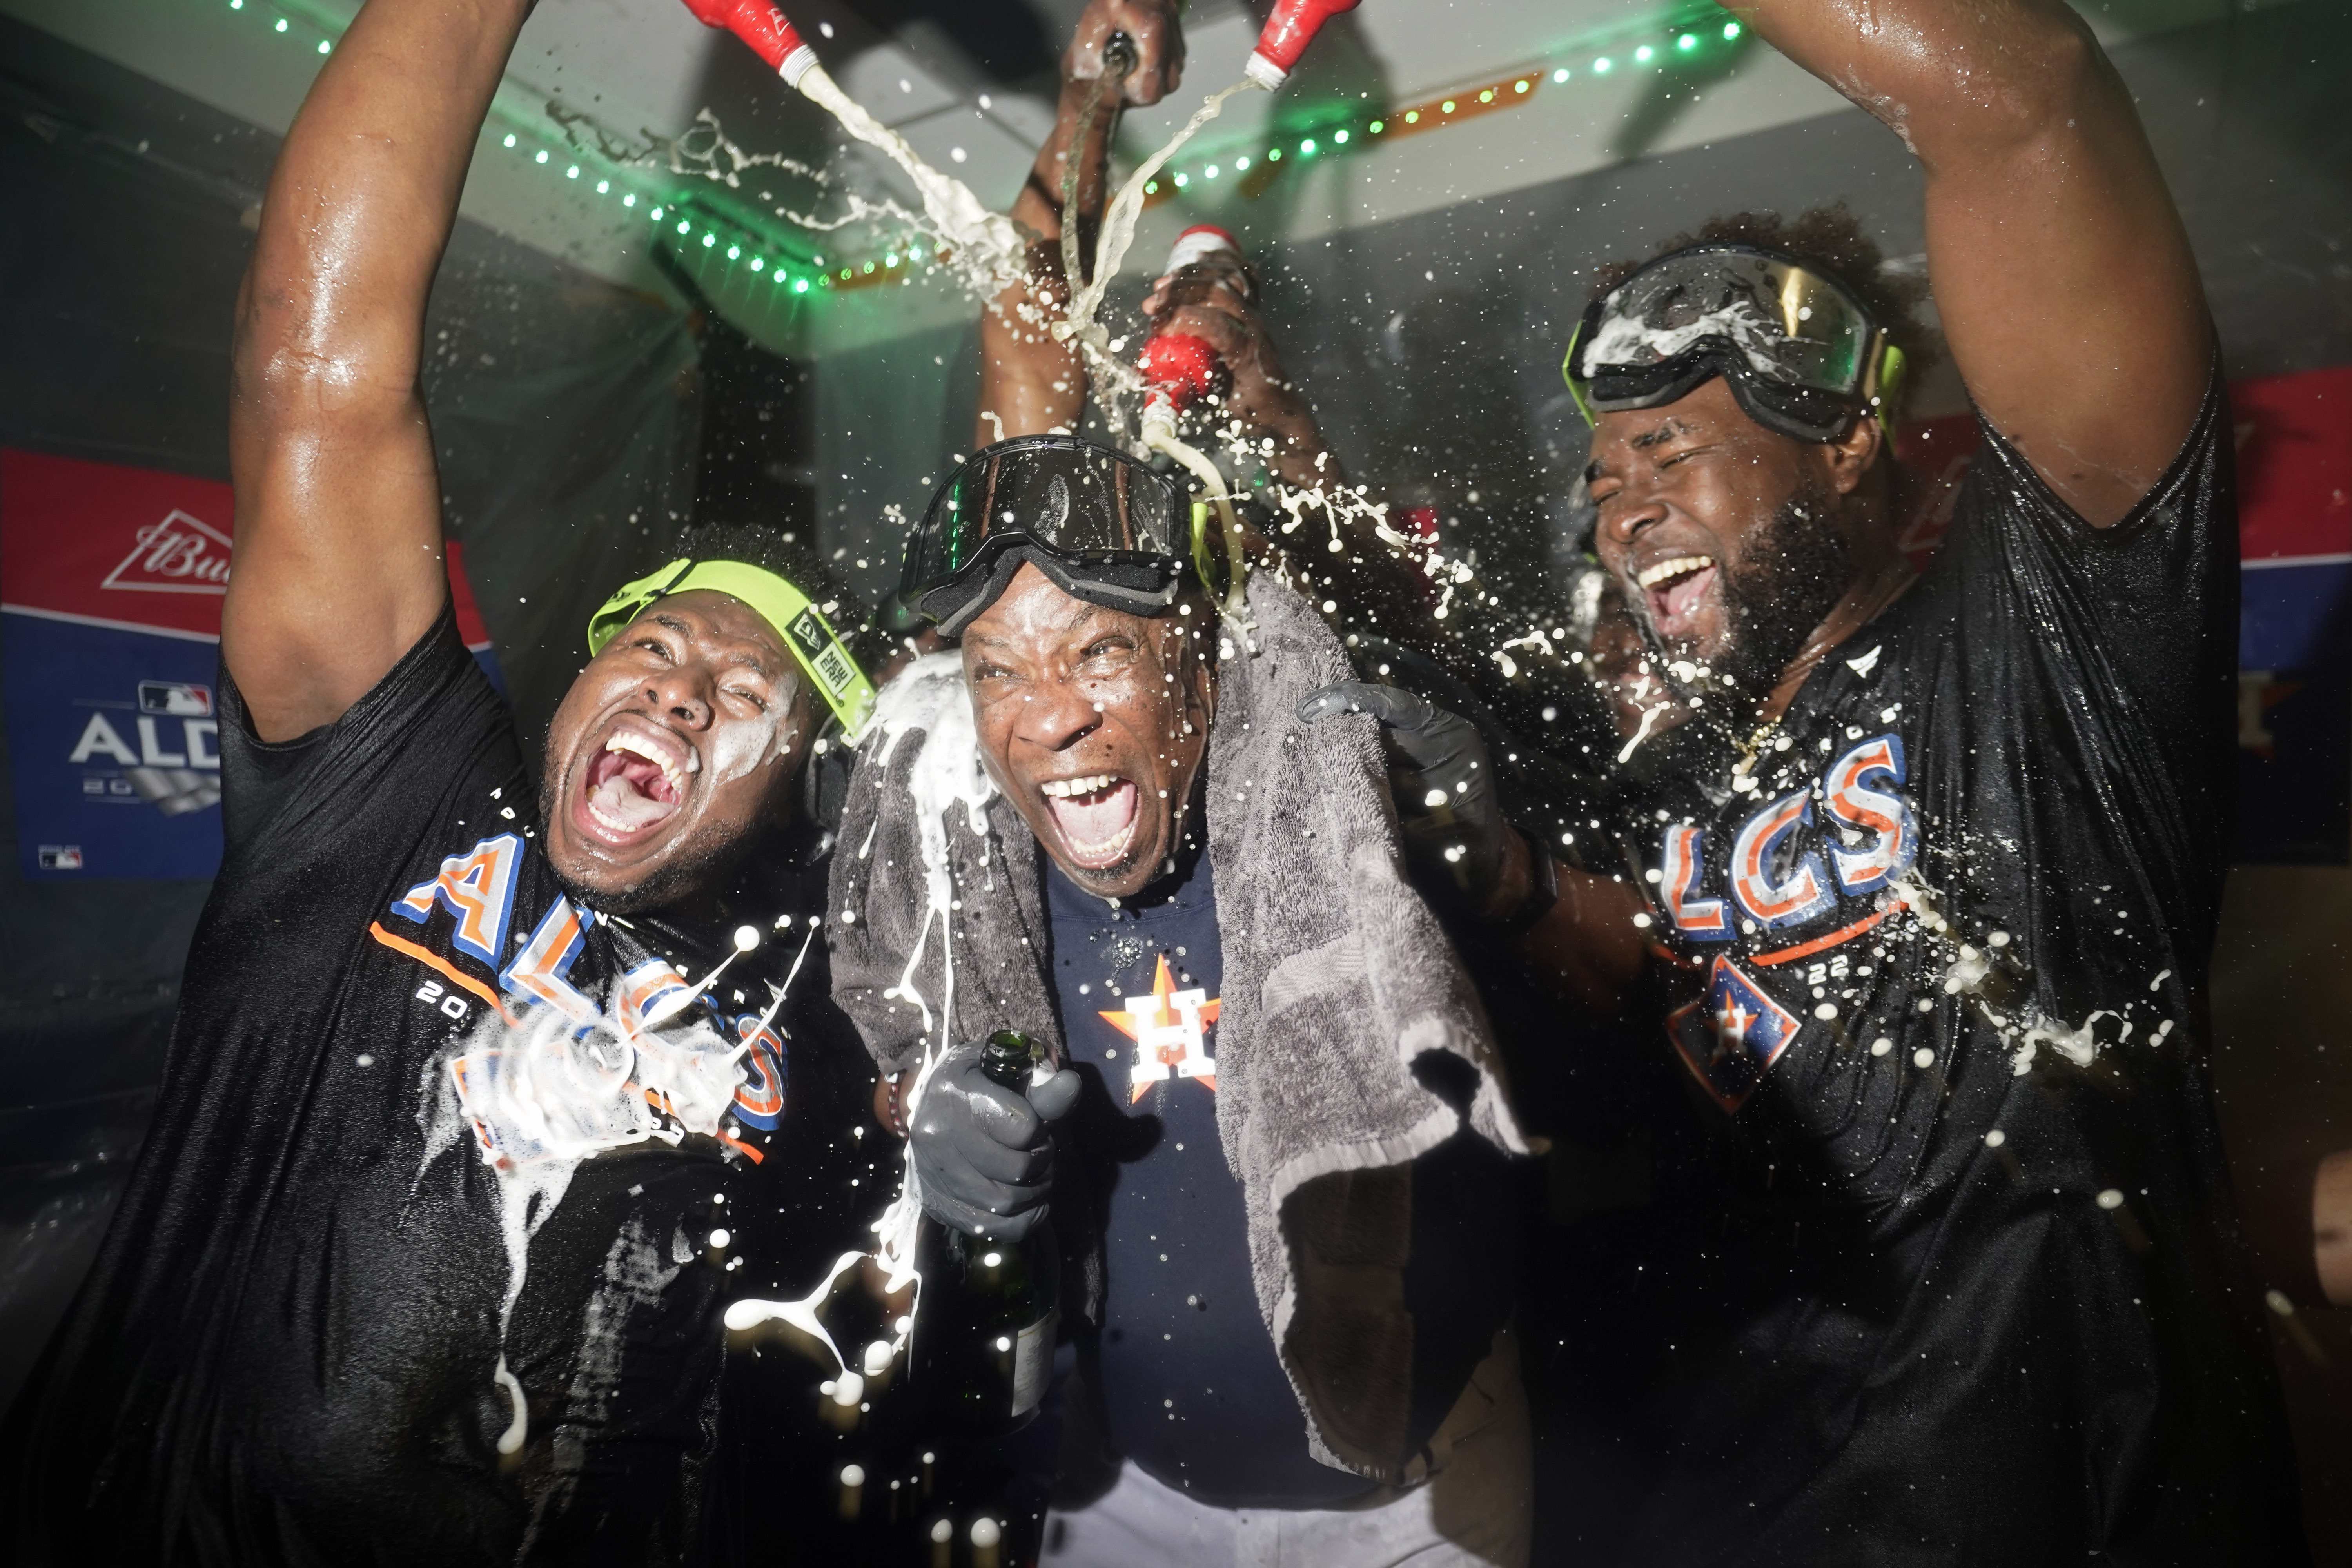 As Astros manager Dusty Baker nears 2,000th win, a reminder to